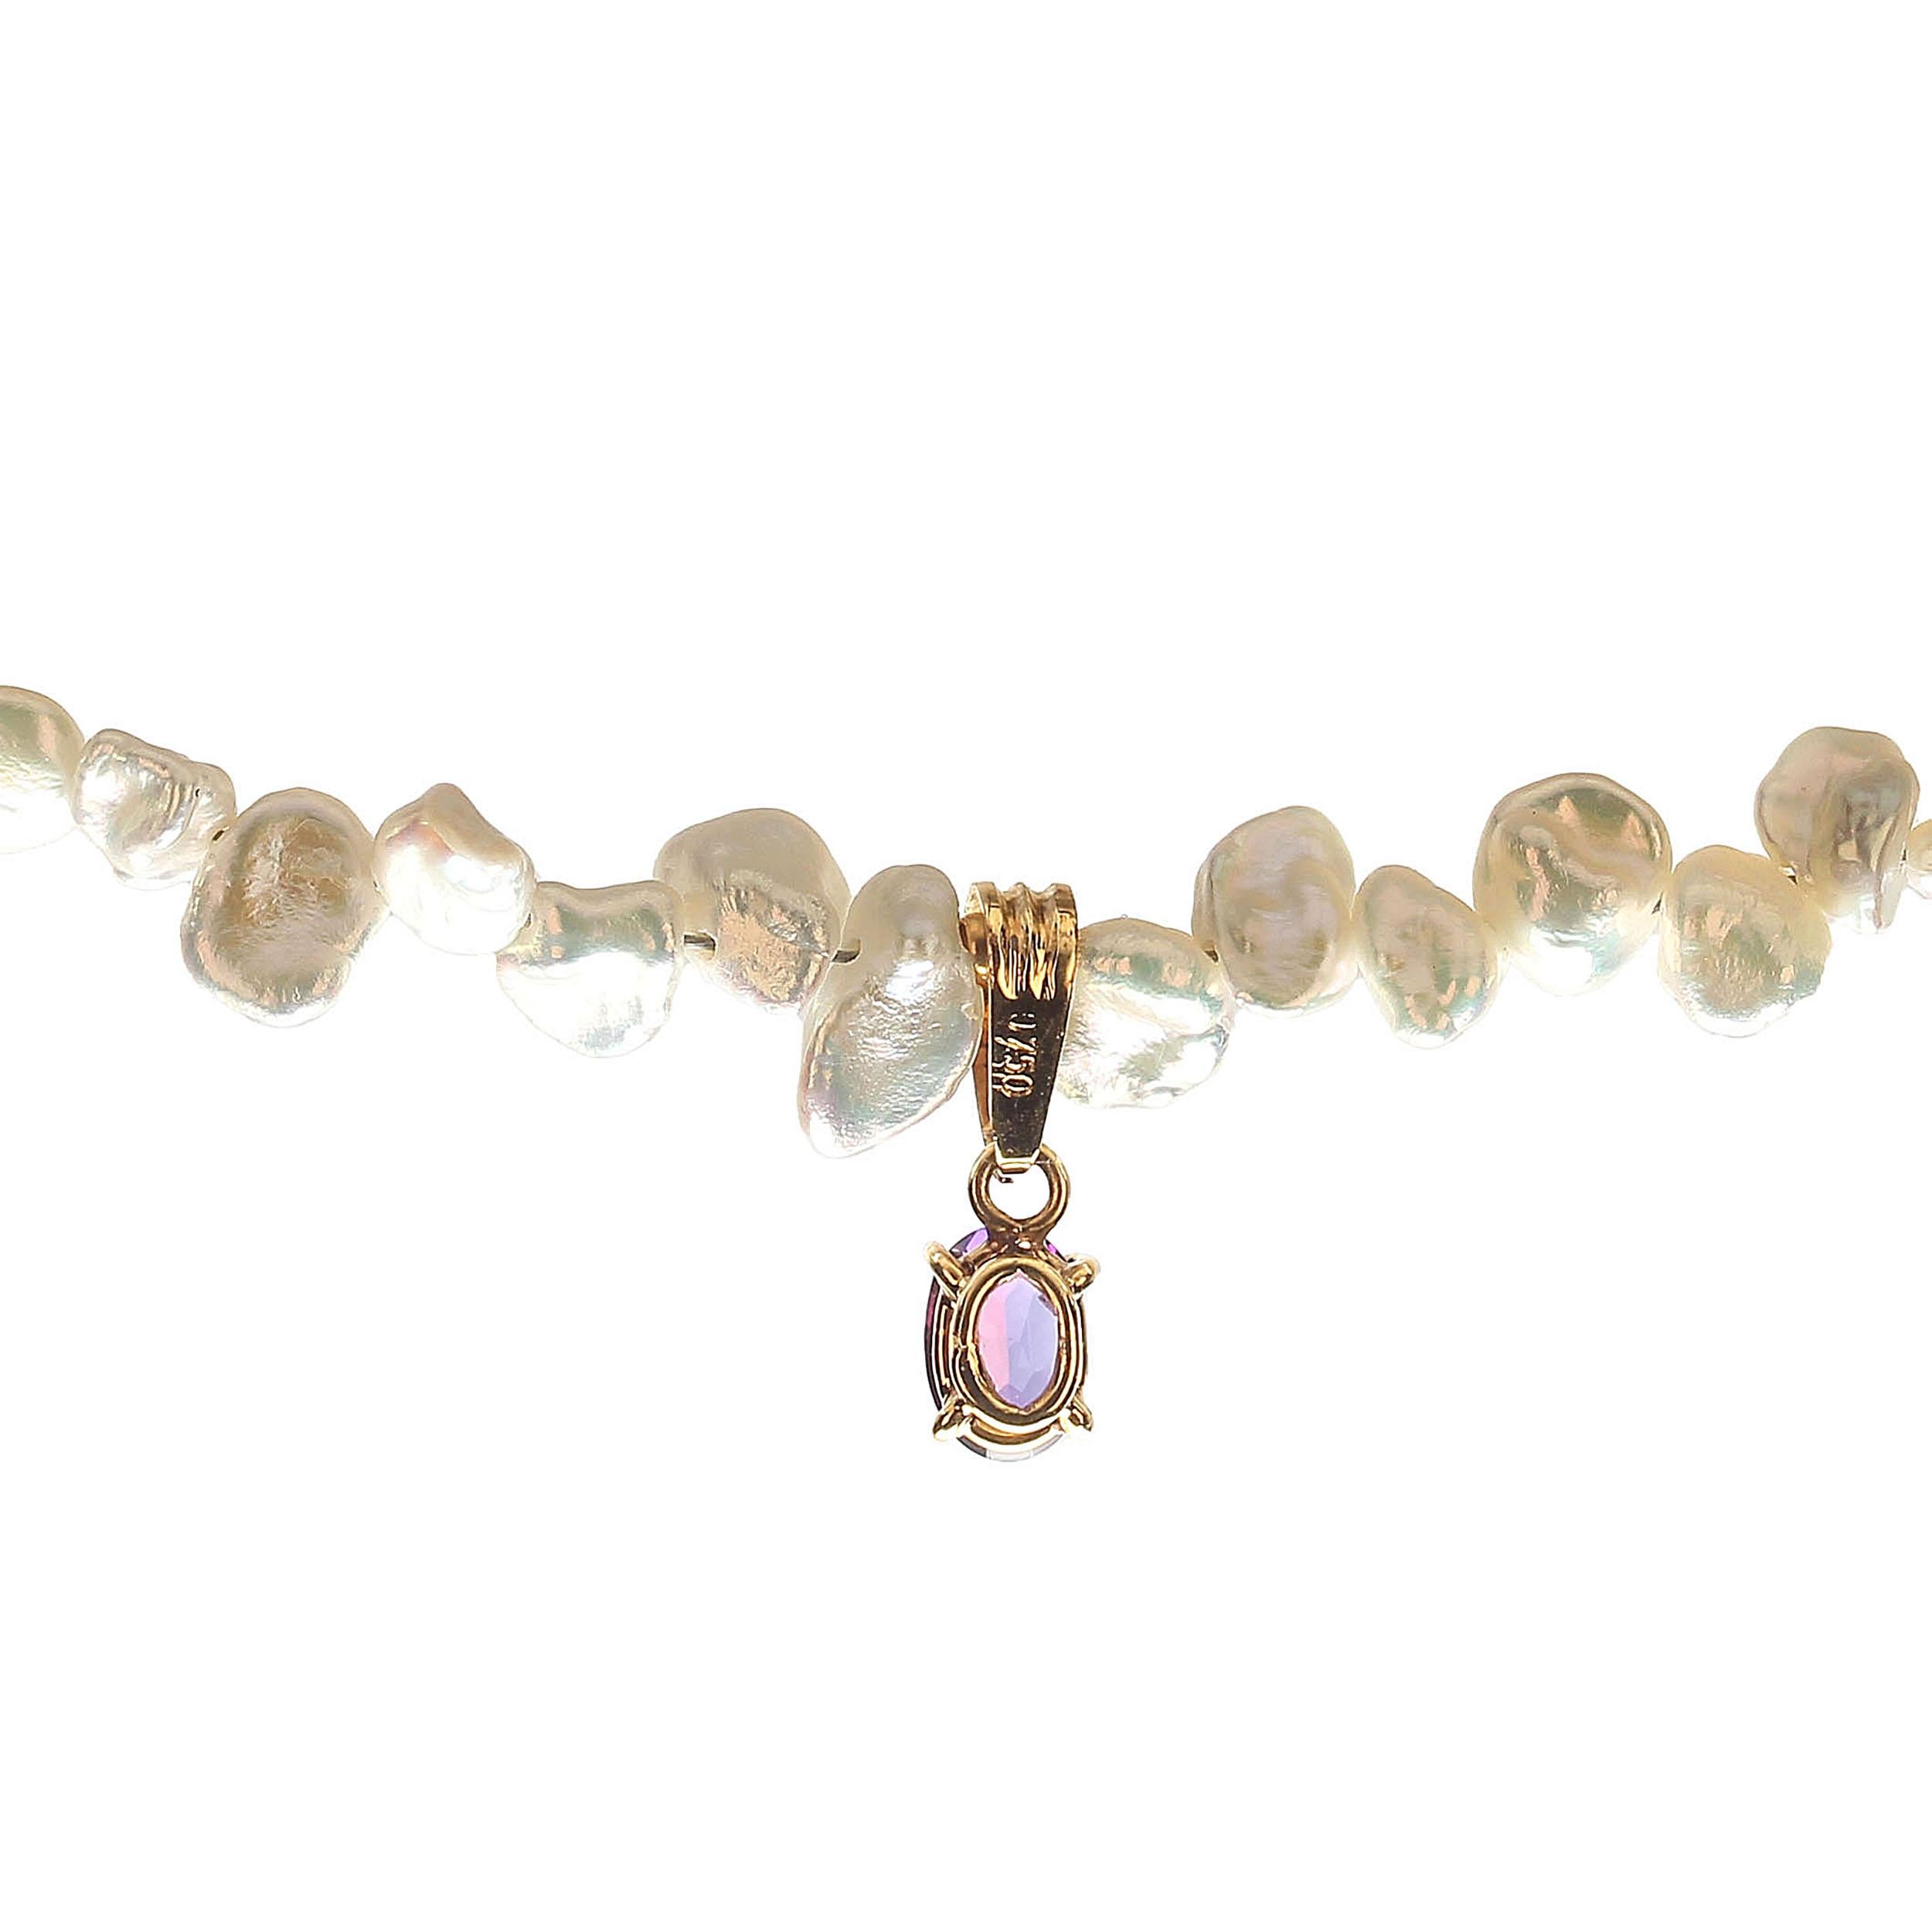 Women's or Men's AJD Freshwater Pearl Necklace with Amethyst in 18K Yellow Gold